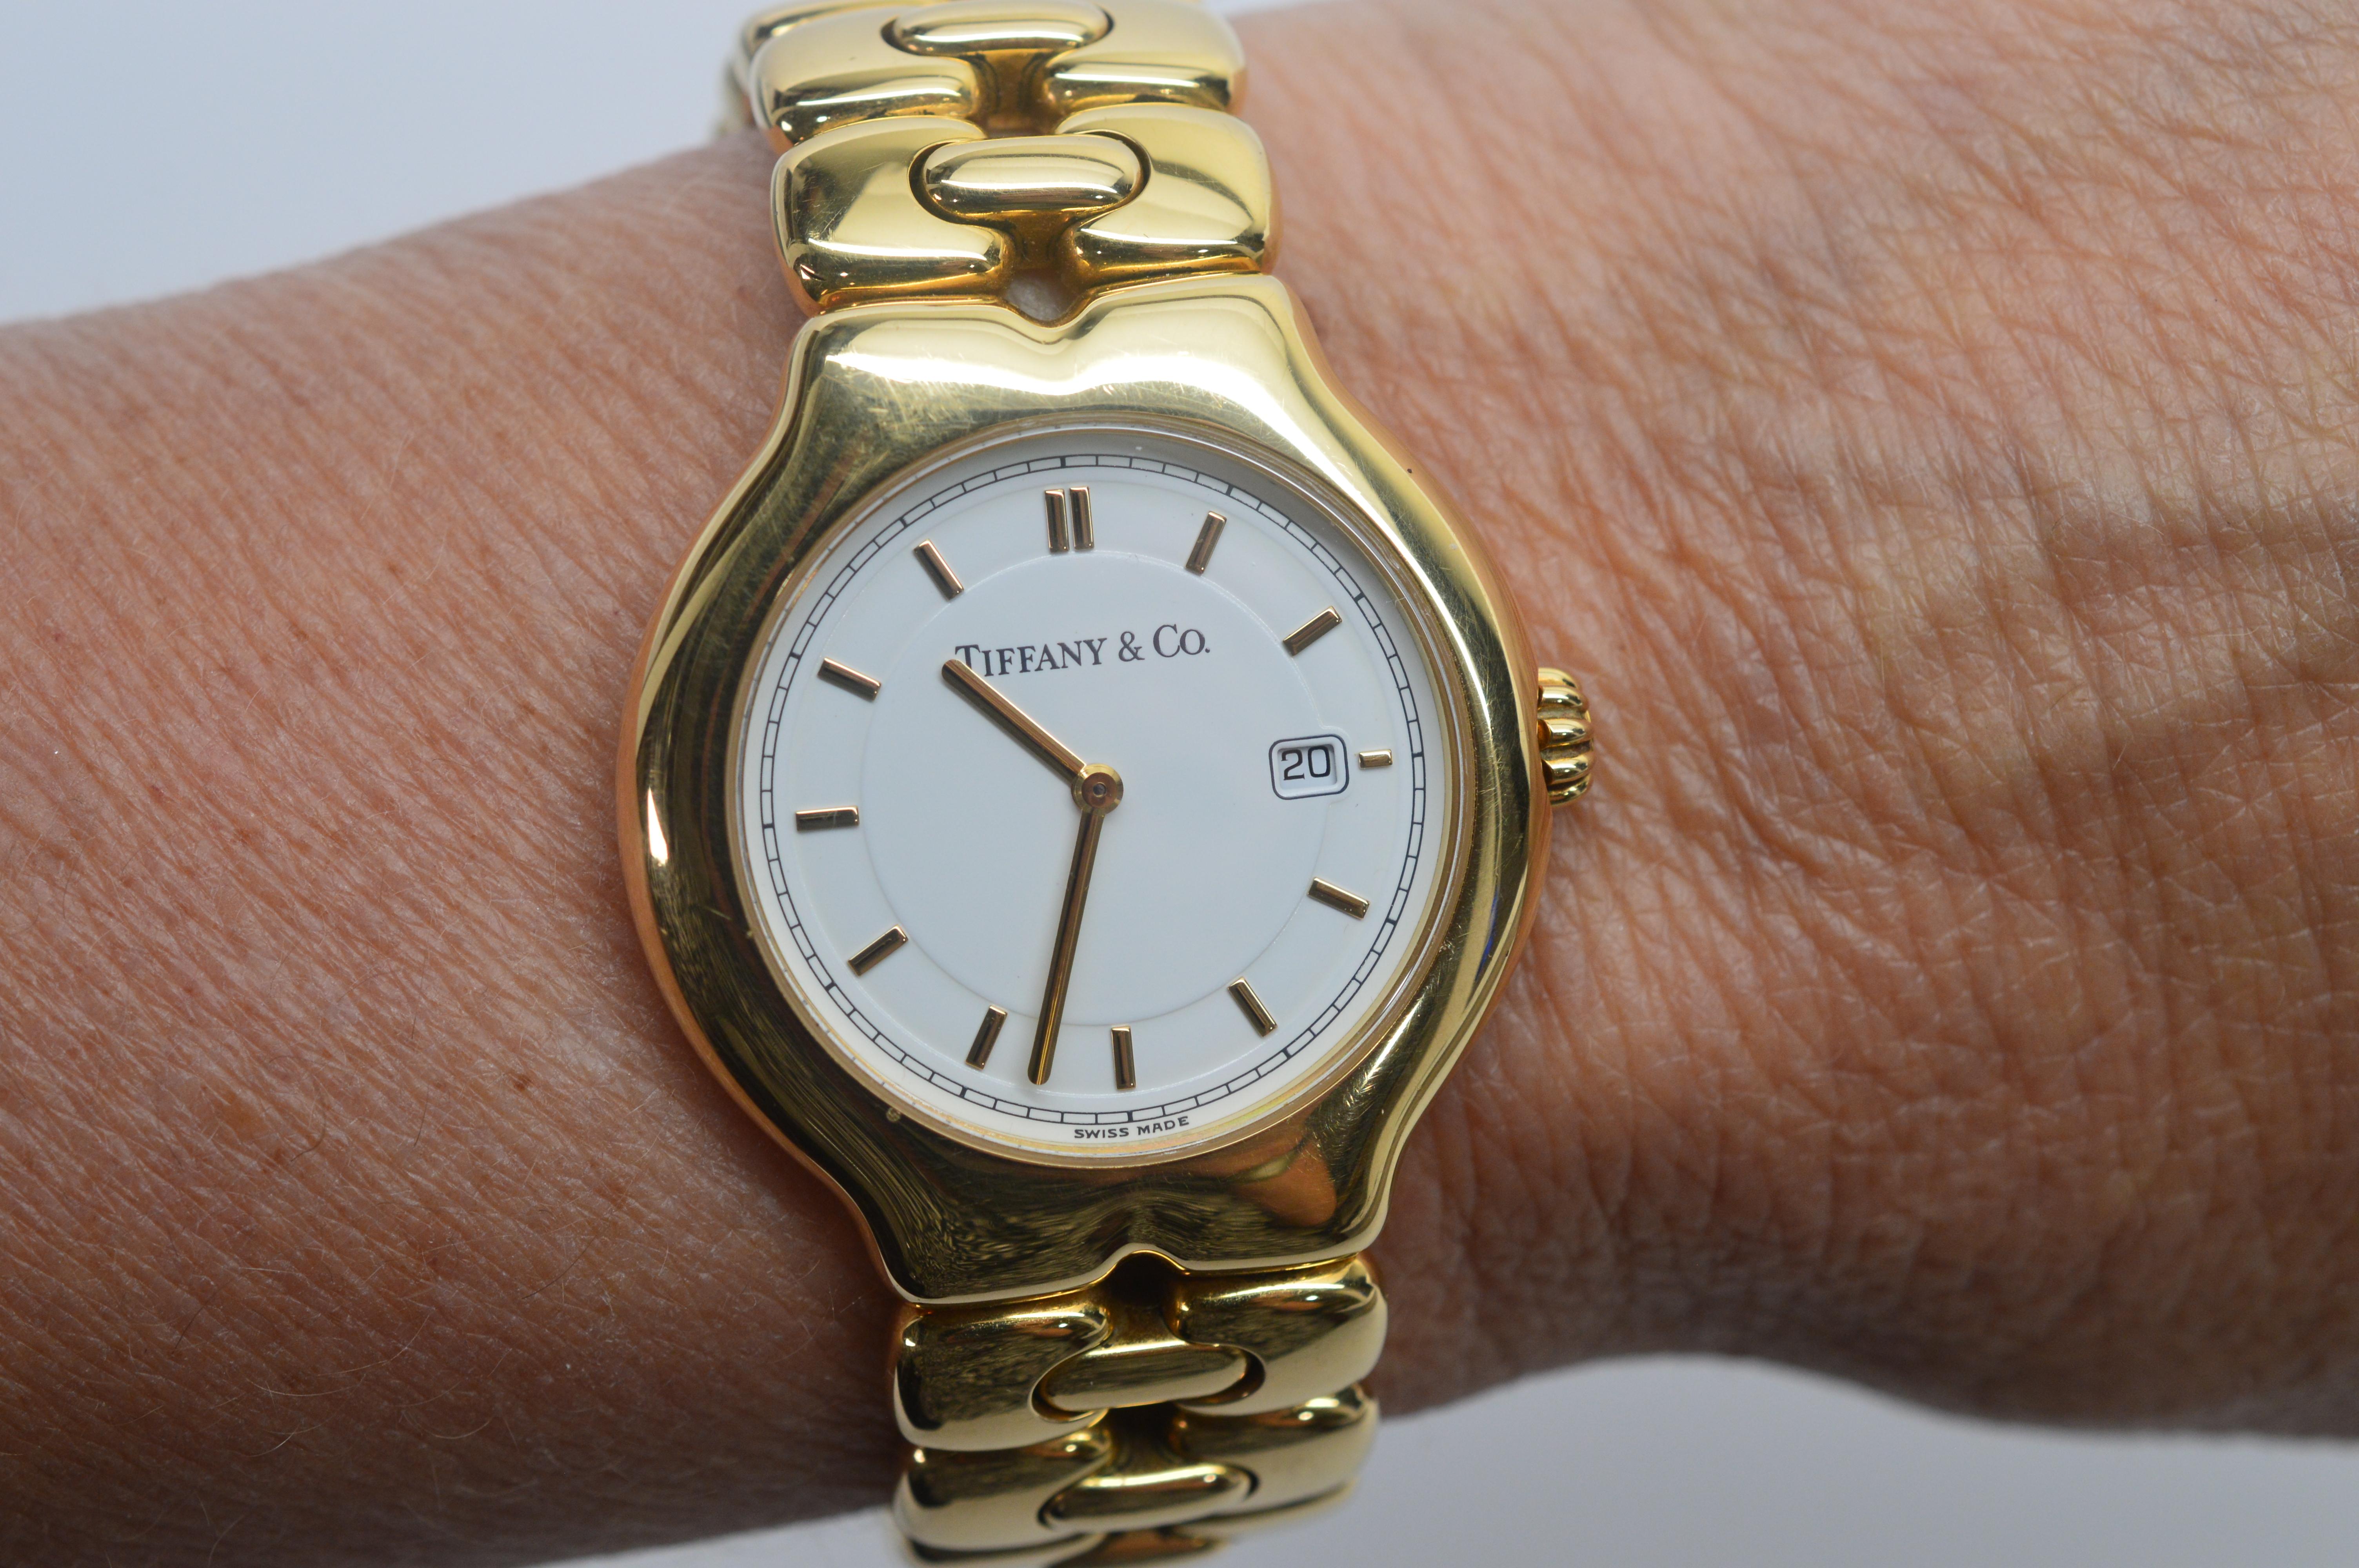 Tiffany & Co. 18 Karat Yellow Gold Tesoro Quartz Watch In Excellent Condition For Sale In Mount Kisco, NY